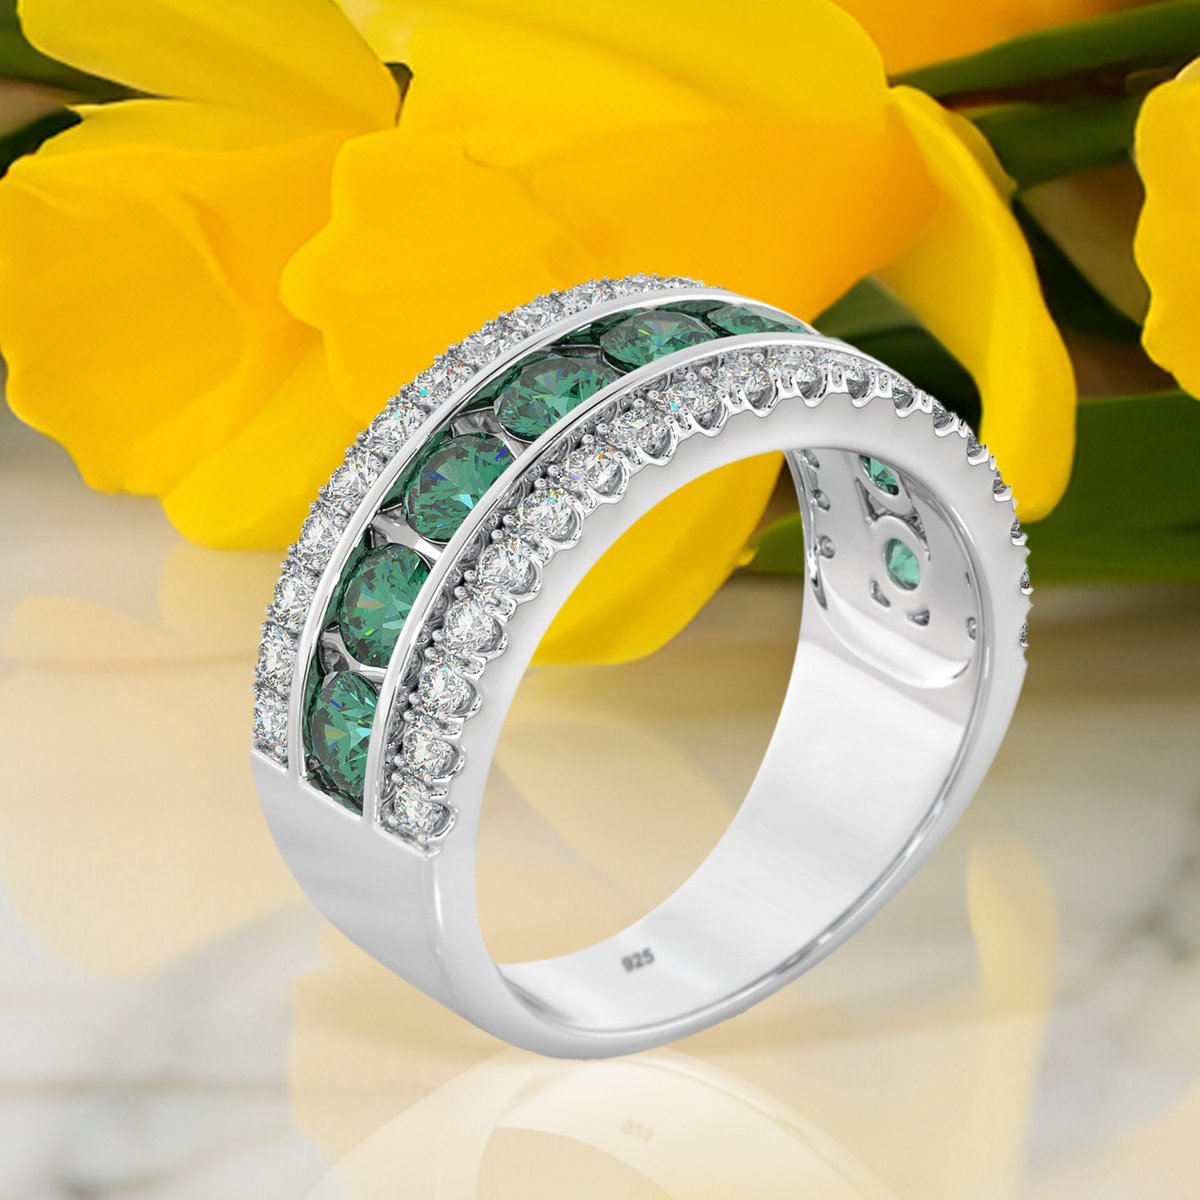 💚💎💚 This rings is simply irresistible, don't you think?

Find it here: bit.ly/2PyUIOt

#EmeraldElegance #SterlingSilverMagic #Besttohave #Besttohavejewelry #lovejewelry #weddinginspiration #weddingplans #silverjewelry #silverrings #rings #engagement